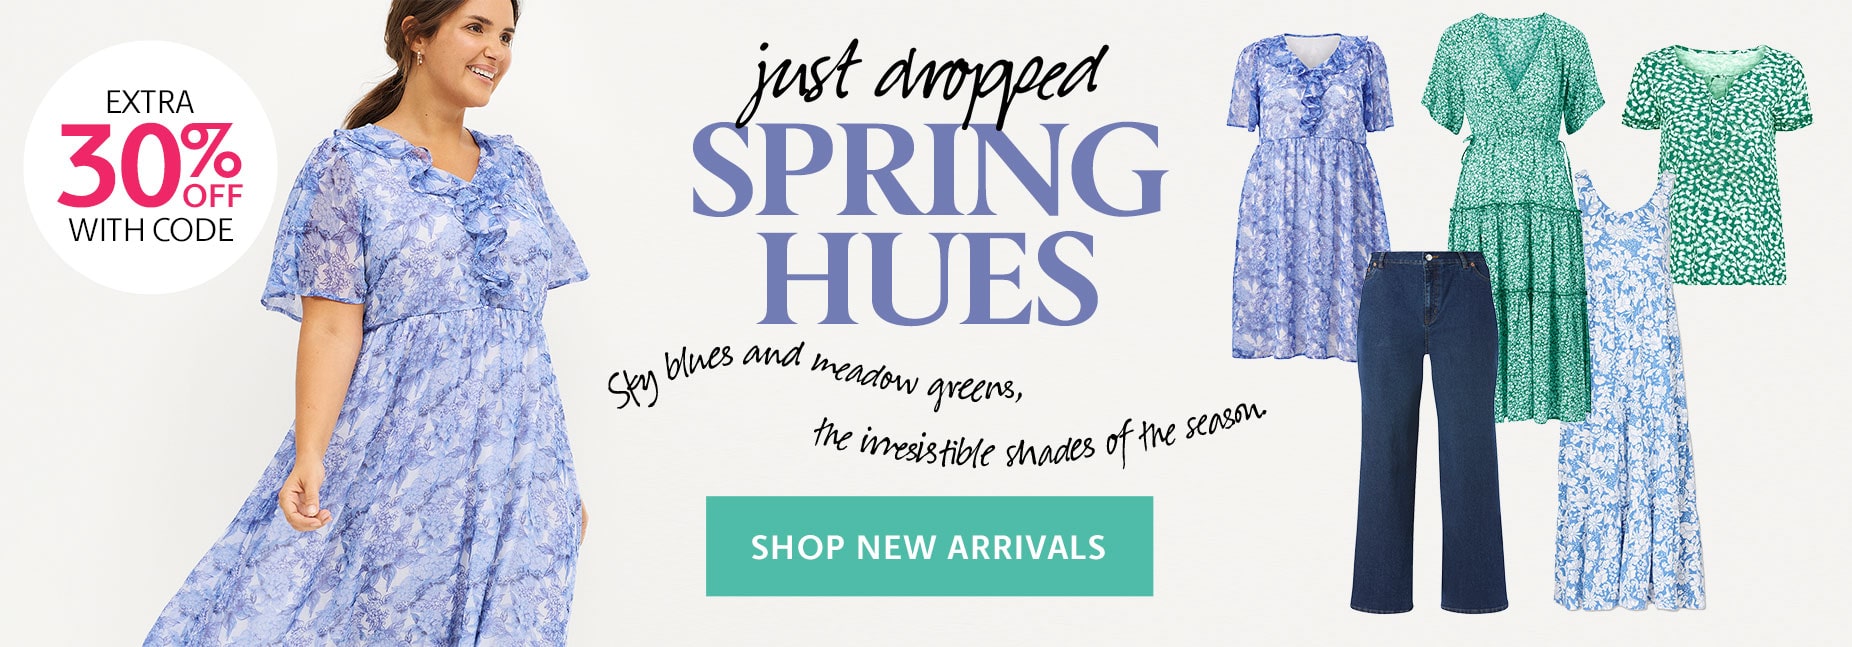 New Arrivals - Just Dropped Spring Hues